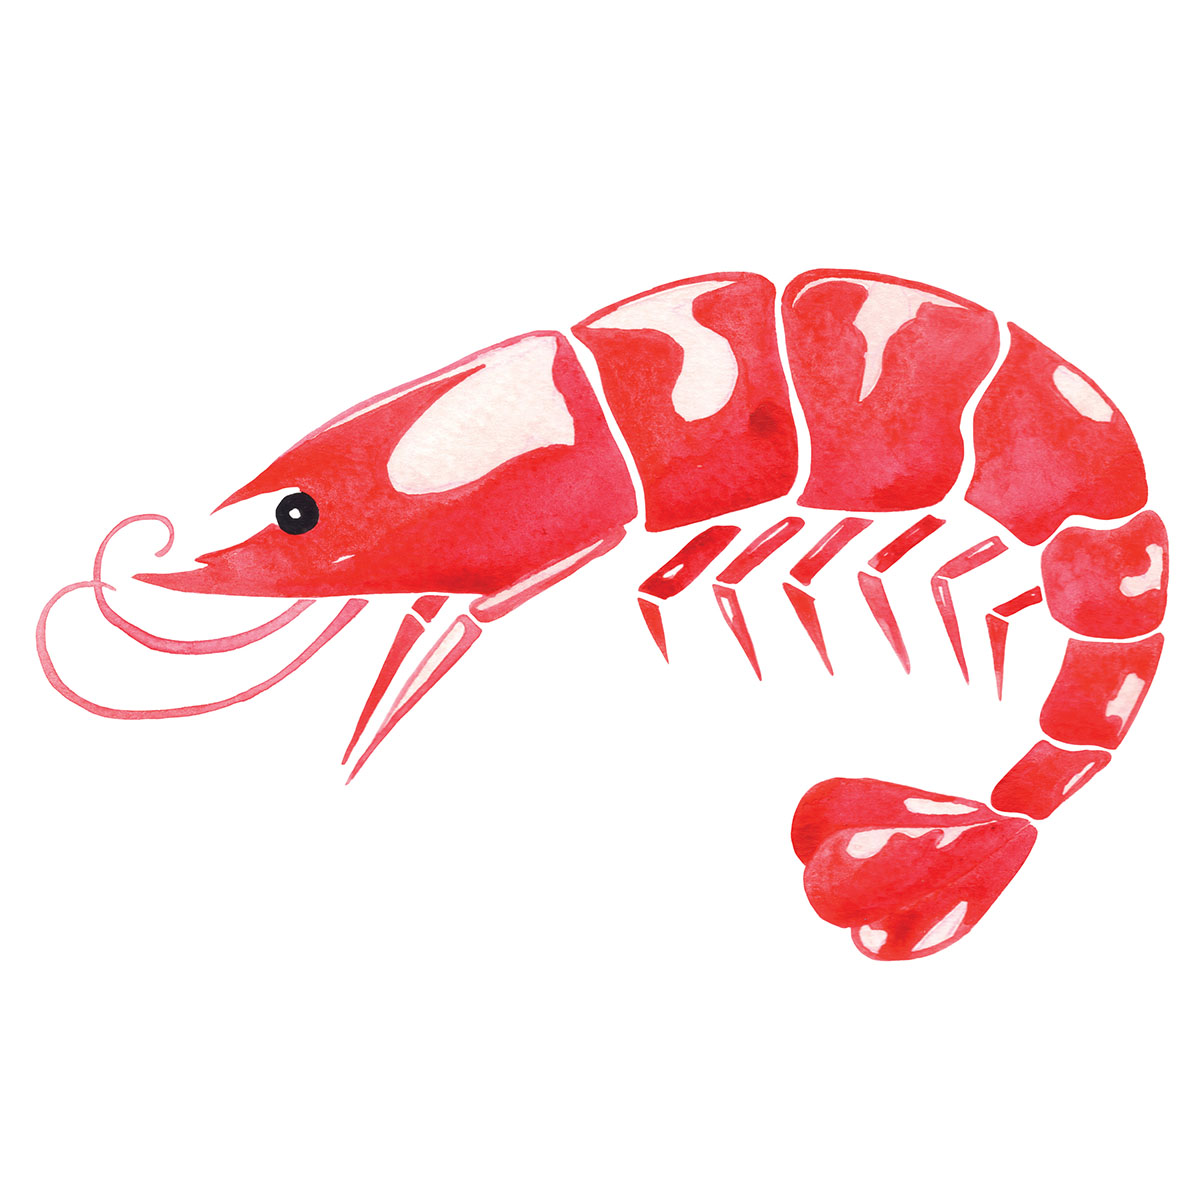 An illustration of a red gulf shrimp